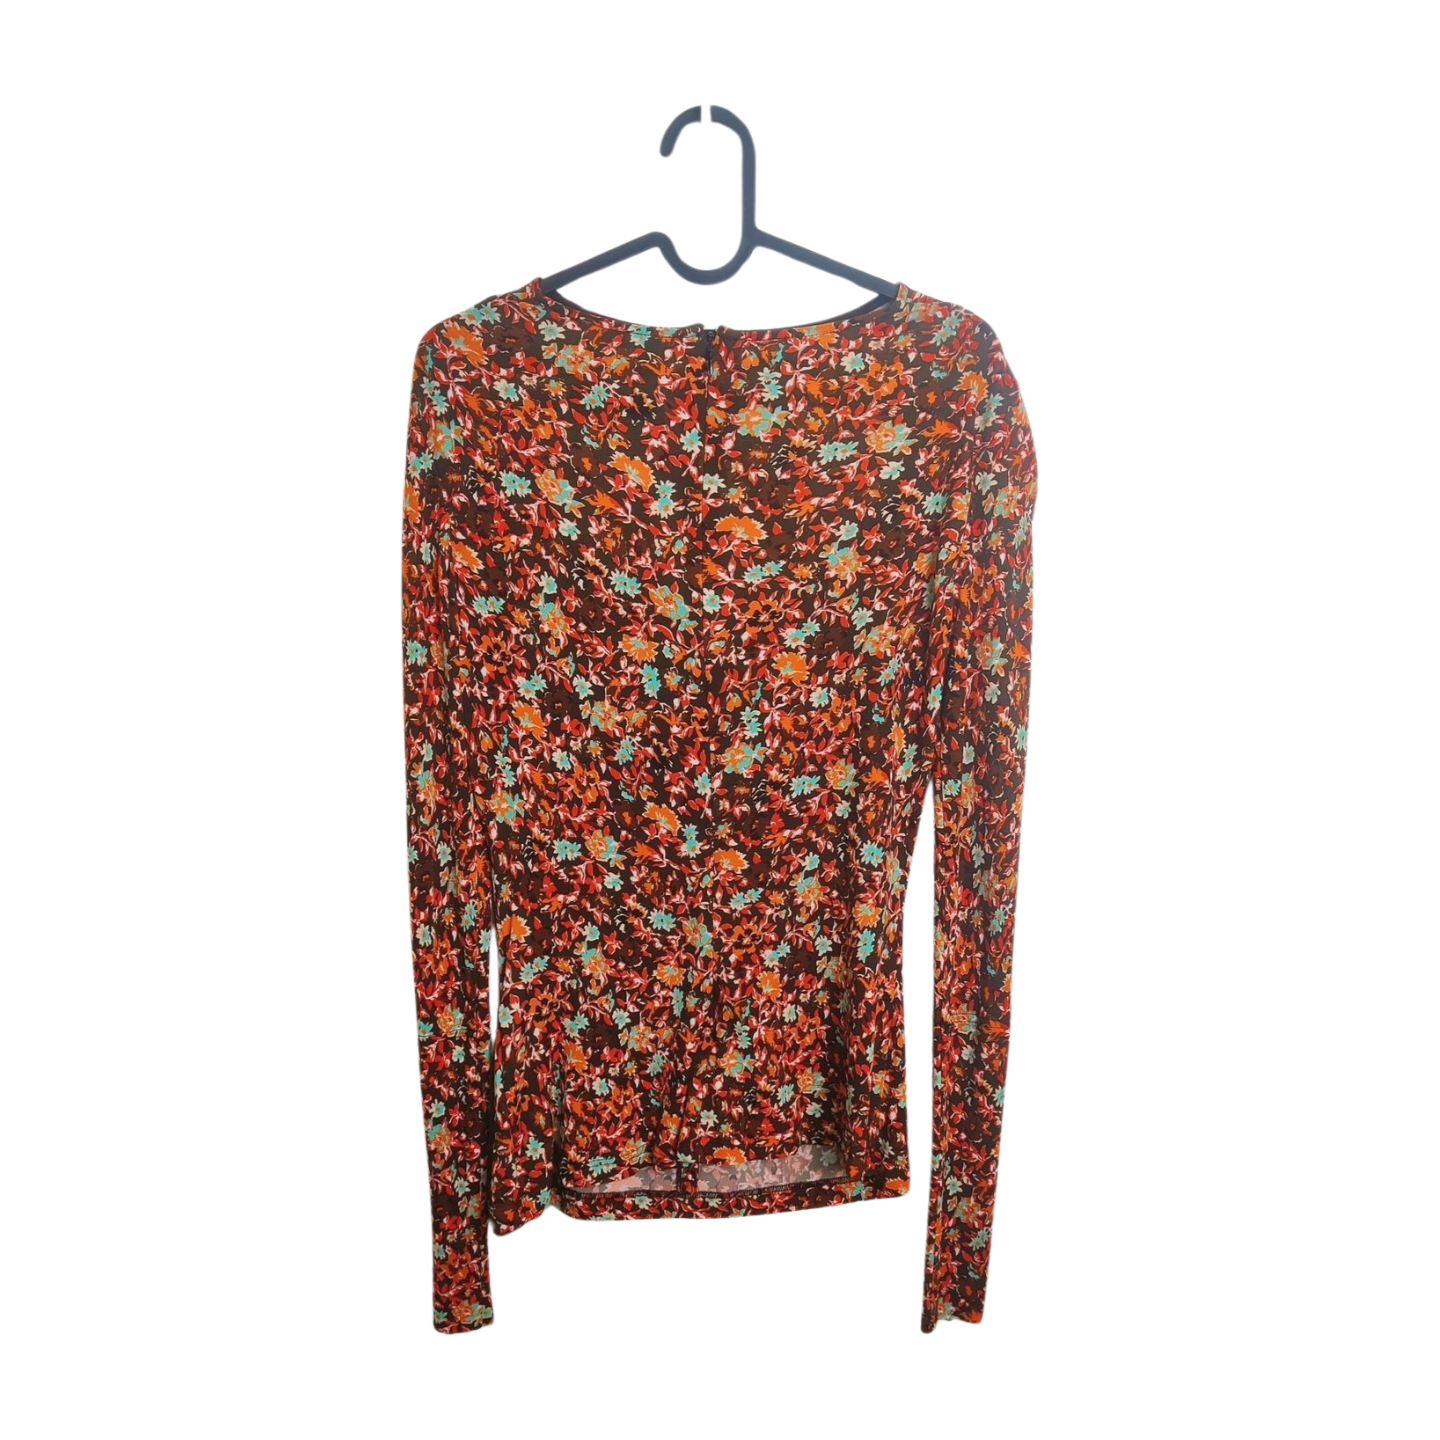 Victoria Beckham Floral Full sleeves Top